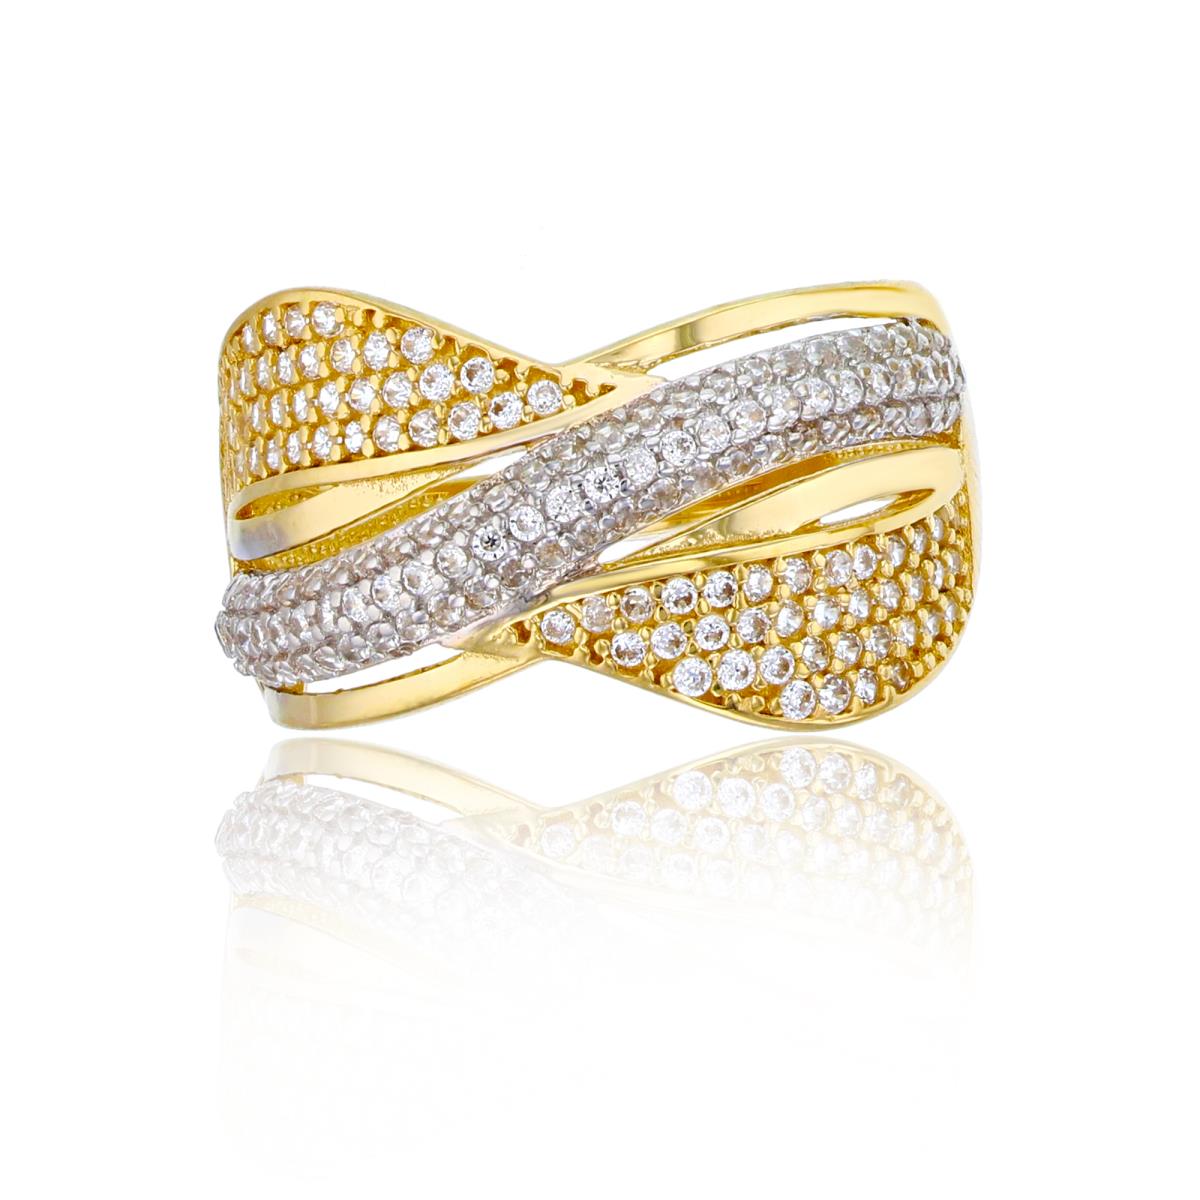 10K Two-Tone Gold Micropave Overlapping Fashion Ring